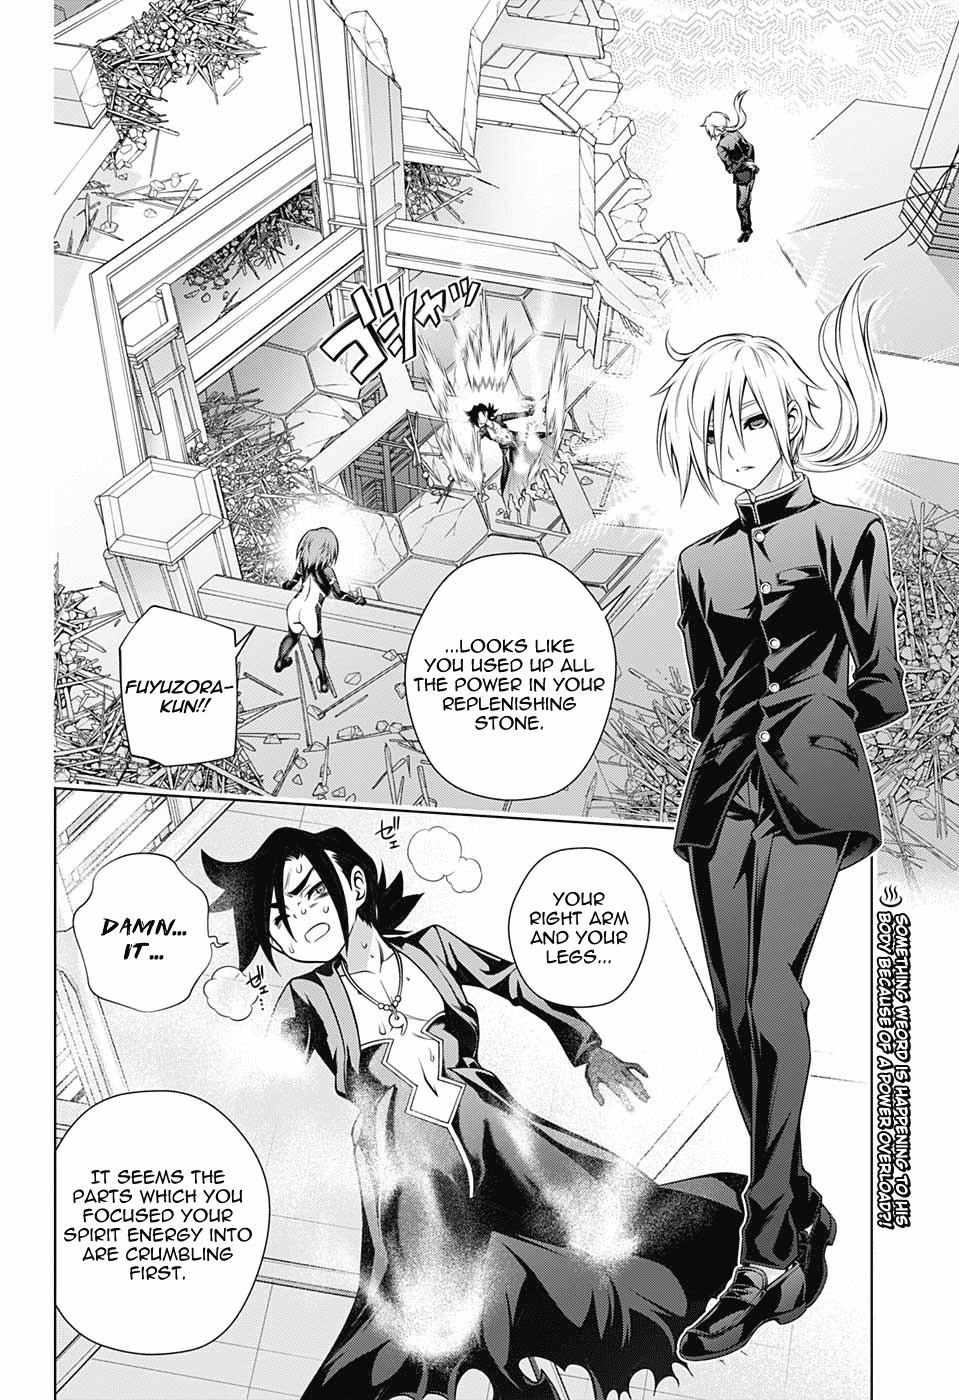 Yuragi-Sou No Yuuna-San Vol.19 Chapter 164: Why Yuuna-San And The Others Are Fighting - Picture 2